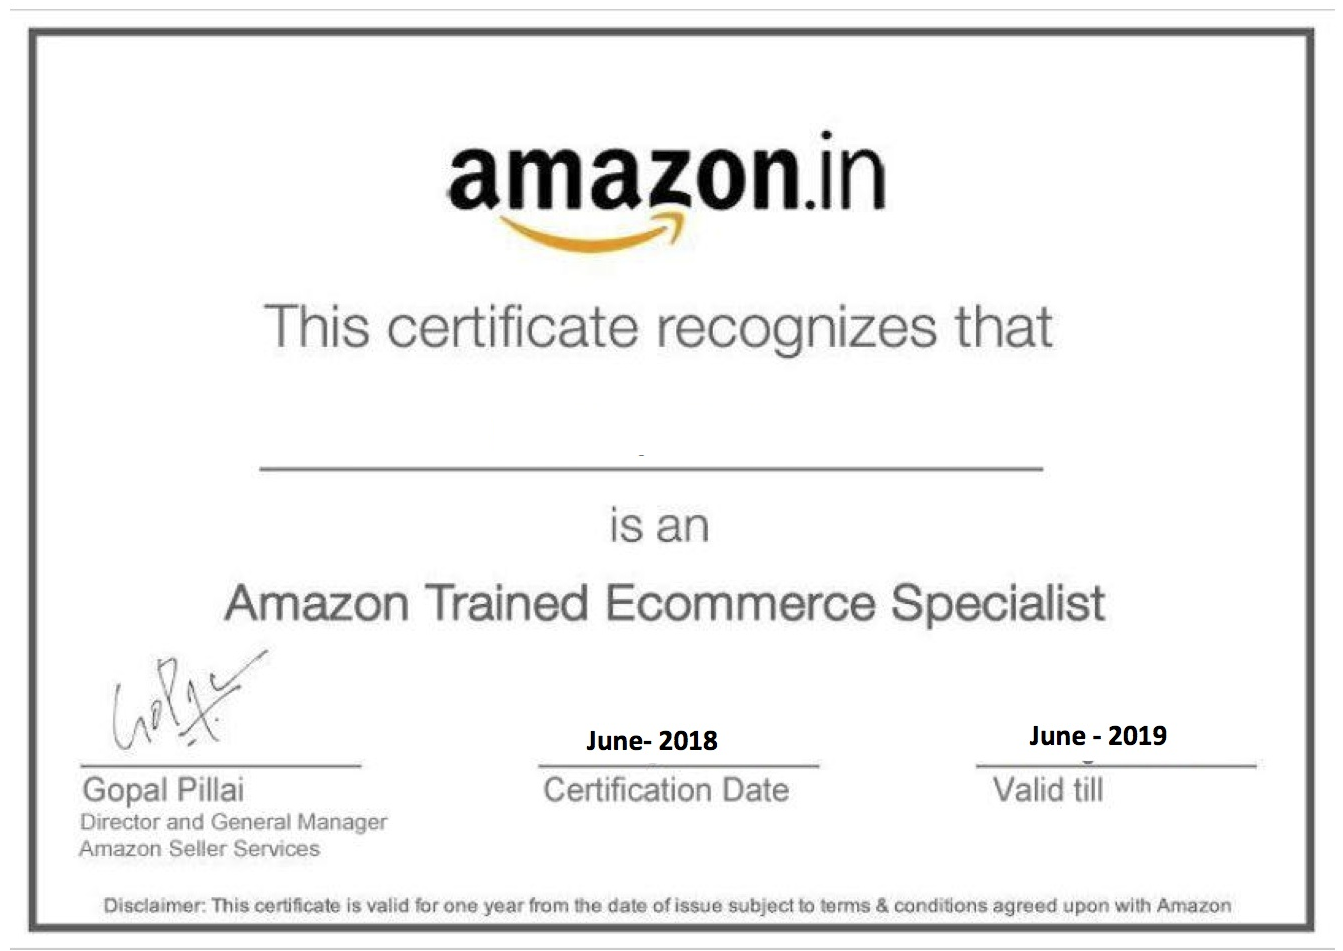 Amazon trained ecommerce specialist ATES Certificate by Progro